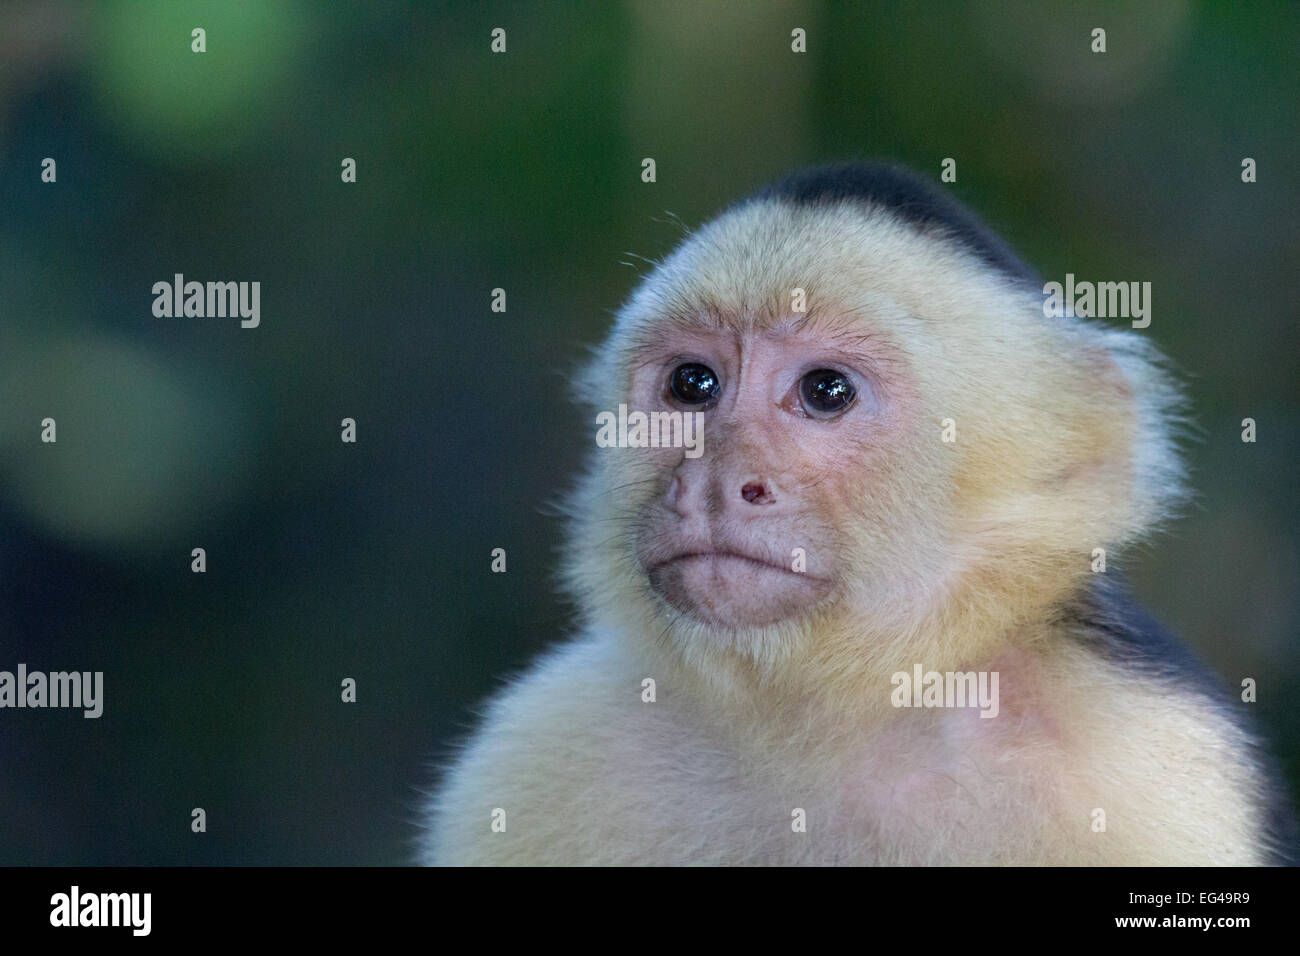 serious facial expression on white faced capuchin Stock Photo